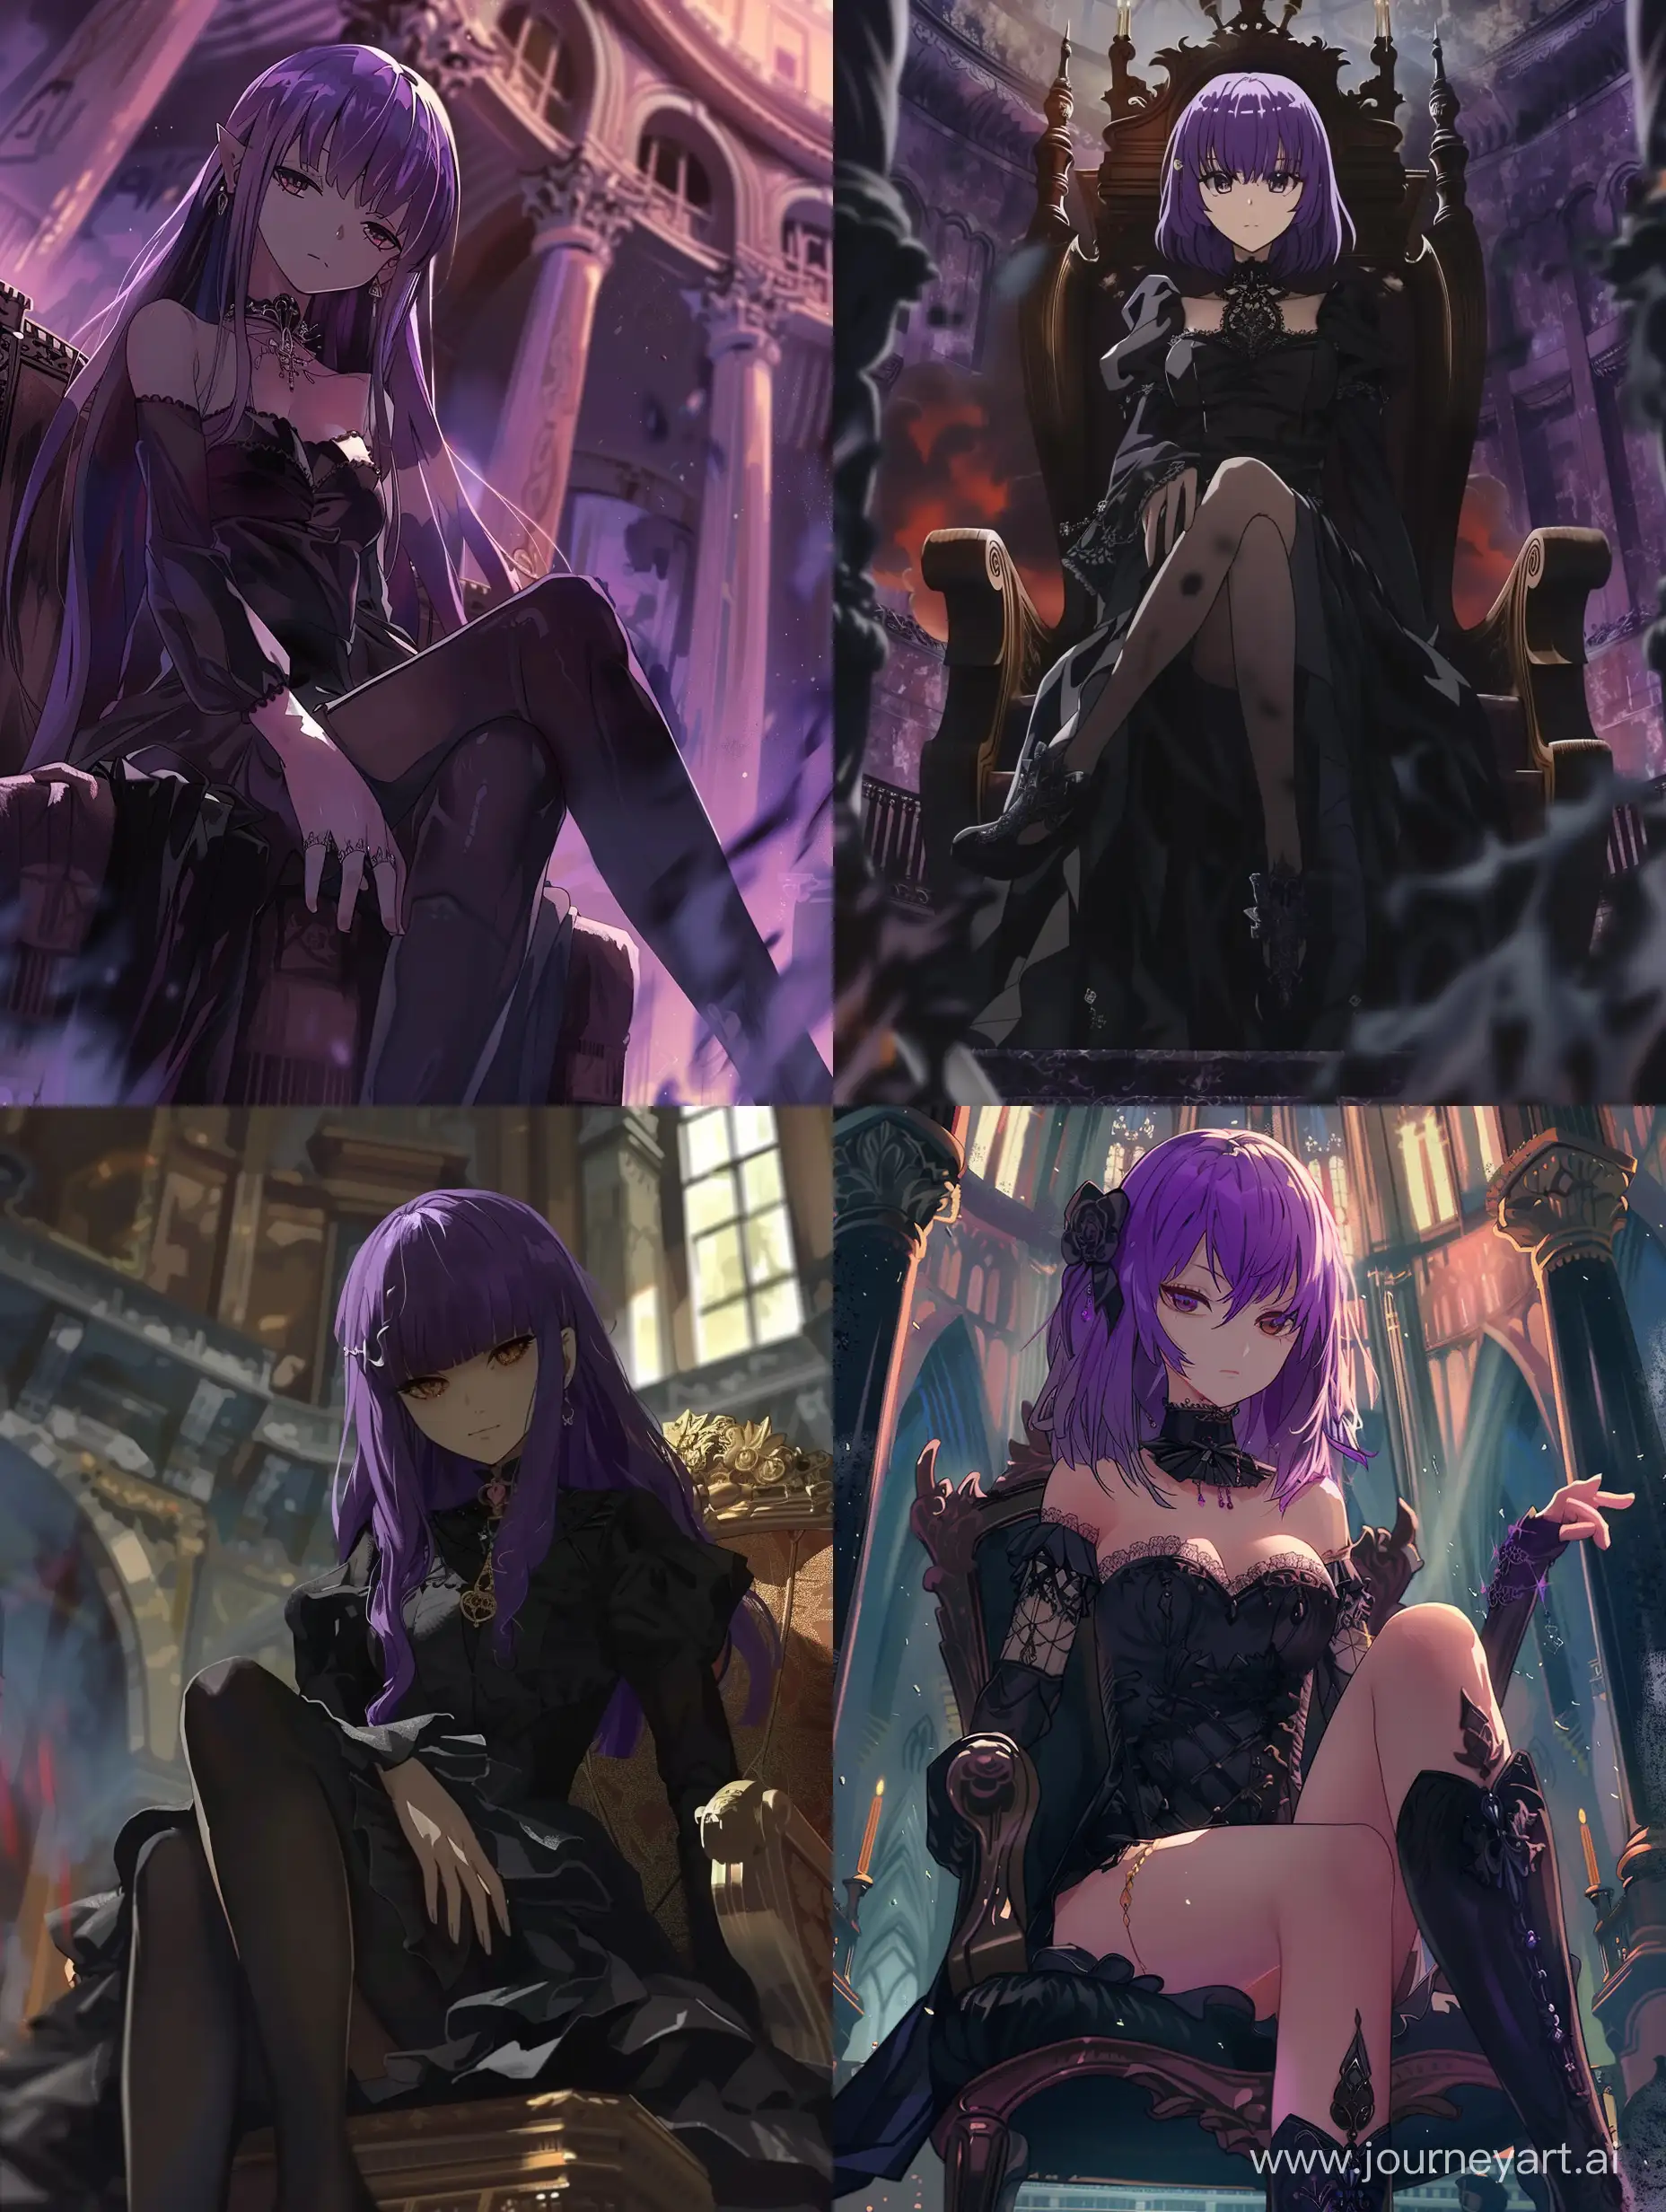 Elegant-PurpleHaired-Anime-Queen-on-Royal-Throne-in-Dark-Palace